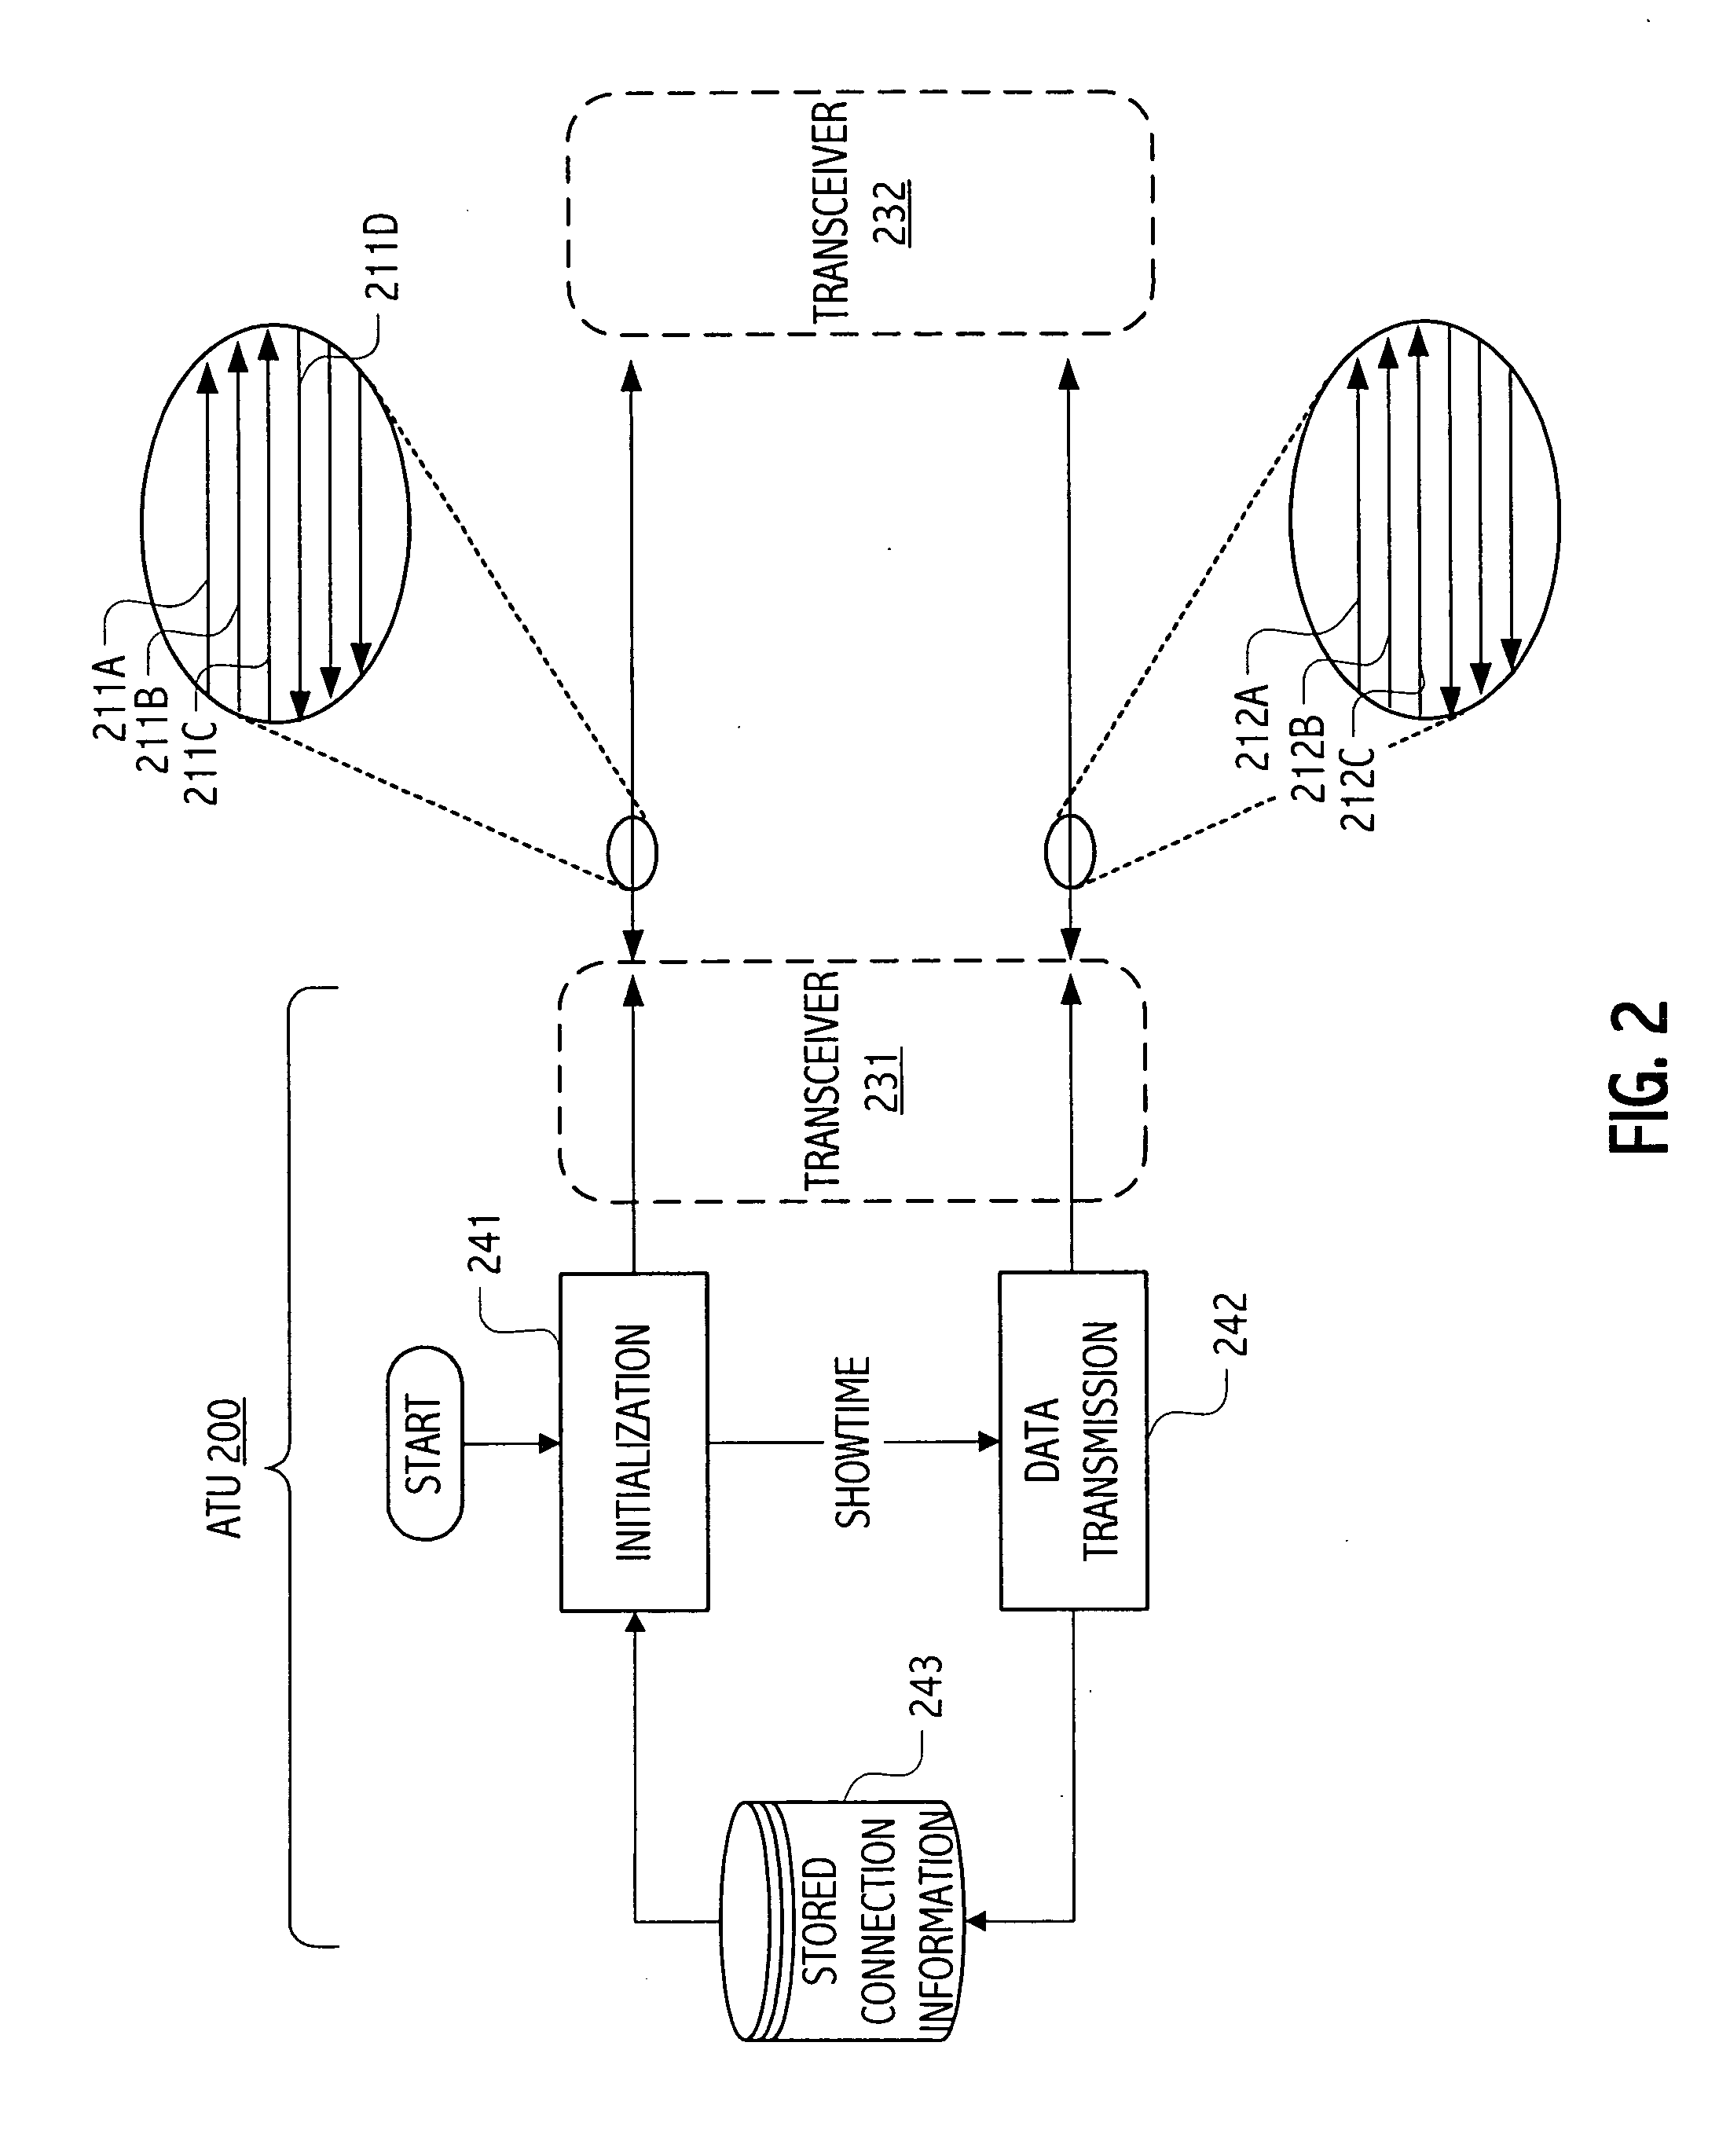 Selectable training signals based on stored previous connection information for DMT-based system